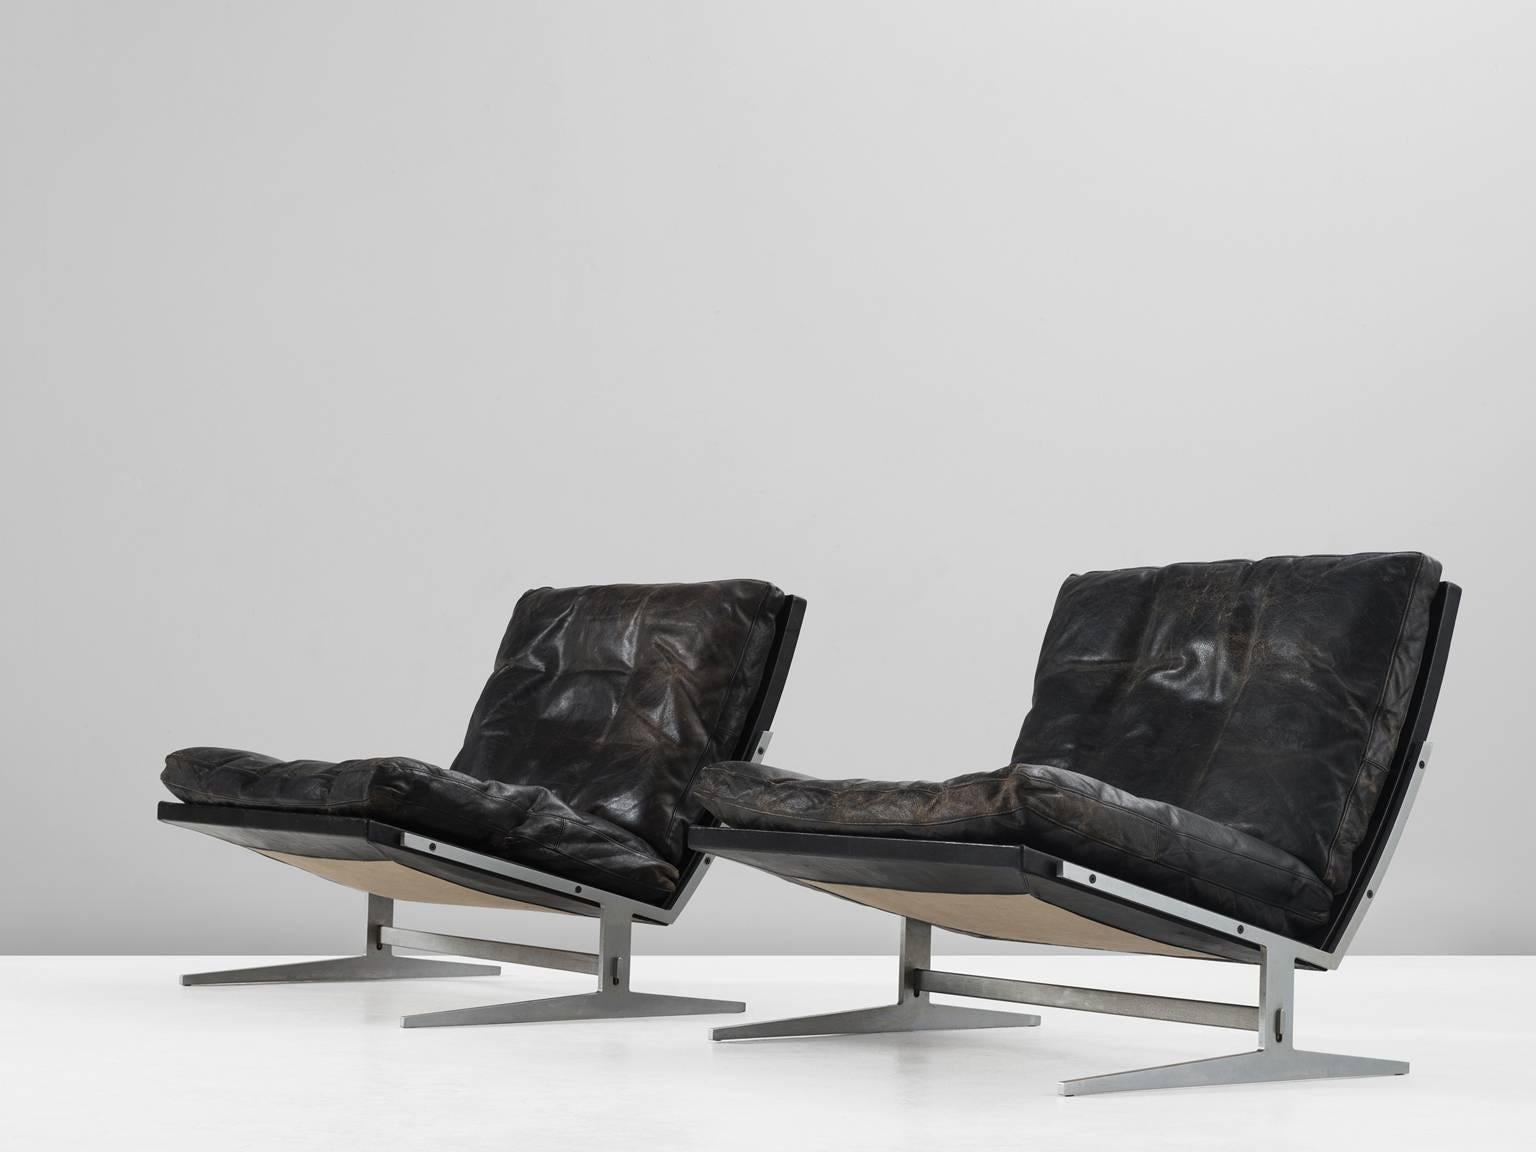 Pair of lounge chairs model BO561, in brushed steel and leather, by Preben Fabricius & Jørgen Kastholm, Denmark, 1962. 

Set of two modern slipper chairs in steel and leather. These chairs hold an L-shaped seating. This shape is repeated in the